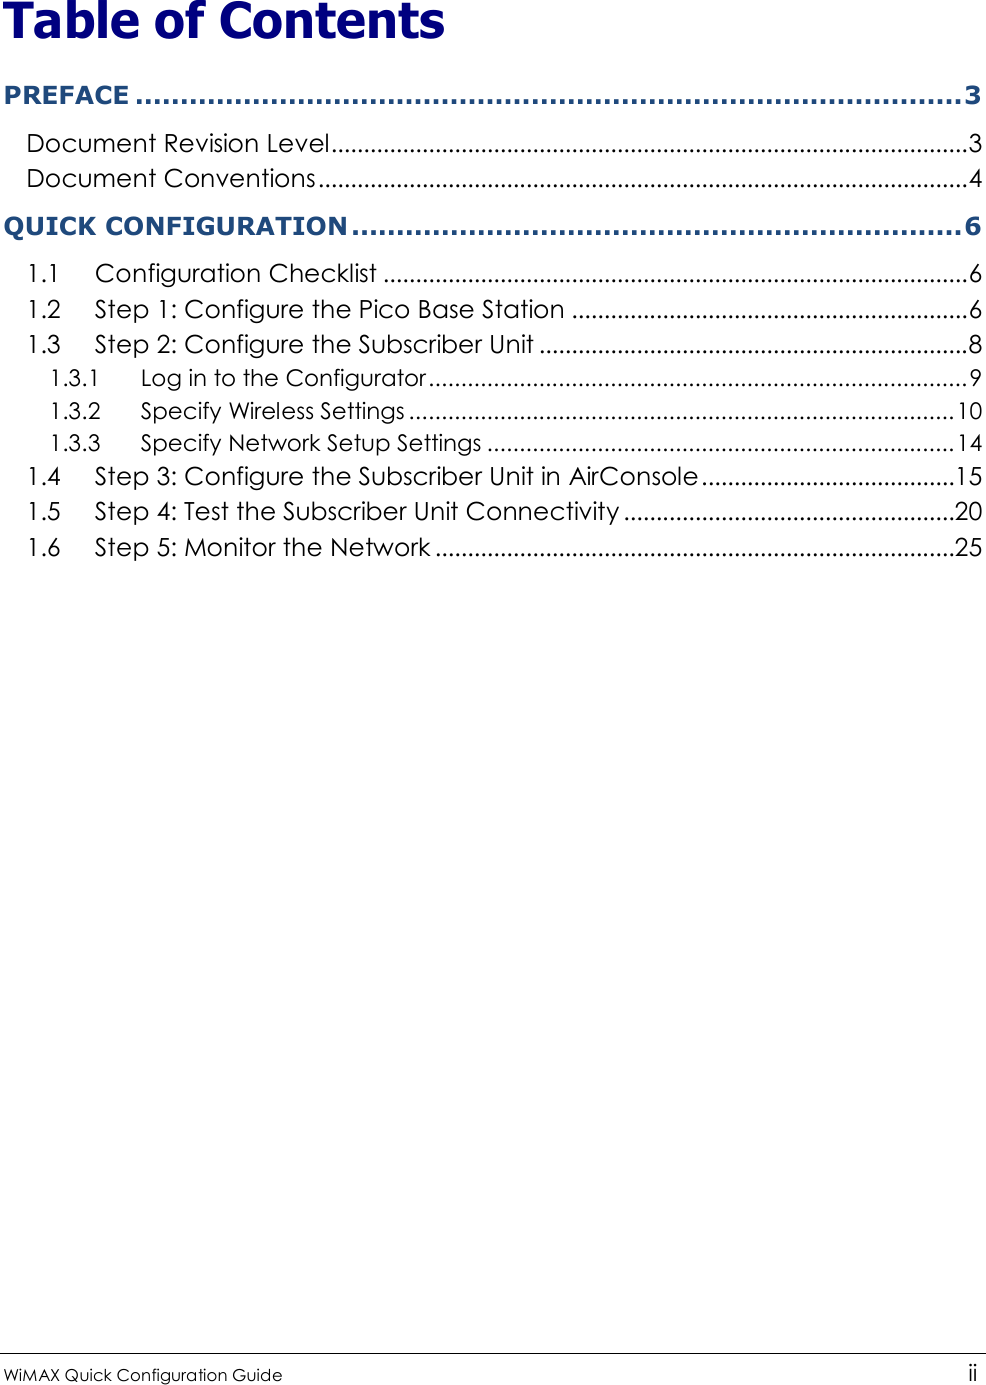  WiMAX Quick Configuration Guide   ii    Table of Contents PREFACE ............................................................................................3 Document Revision Level..................................................................................................3 Document Conventions....................................................................................................4 QUICK CONFIGURATION ....................................................................6 1.1 Configuration Checklist ..........................................................................................6 1.2 Step 1: Configure the Pico Base Station .............................................................6 1.3 Step 2: Configure the Subscriber Unit ..................................................................8 1.3.1  Log in to the Configurator...................................................................................9 1.3.2  Specify Wireless Settings ....................................................................................10 1.3.3  Specify Network Setup Settings ........................................................................14 1.4 Step 3: Configure the Subscriber Unit in AirConsole.......................................15 1.5 Step 4: Test the Subscriber Unit Connectivity ...................................................20 1.6 Step 5: Monitor the Network ................................................................................25 